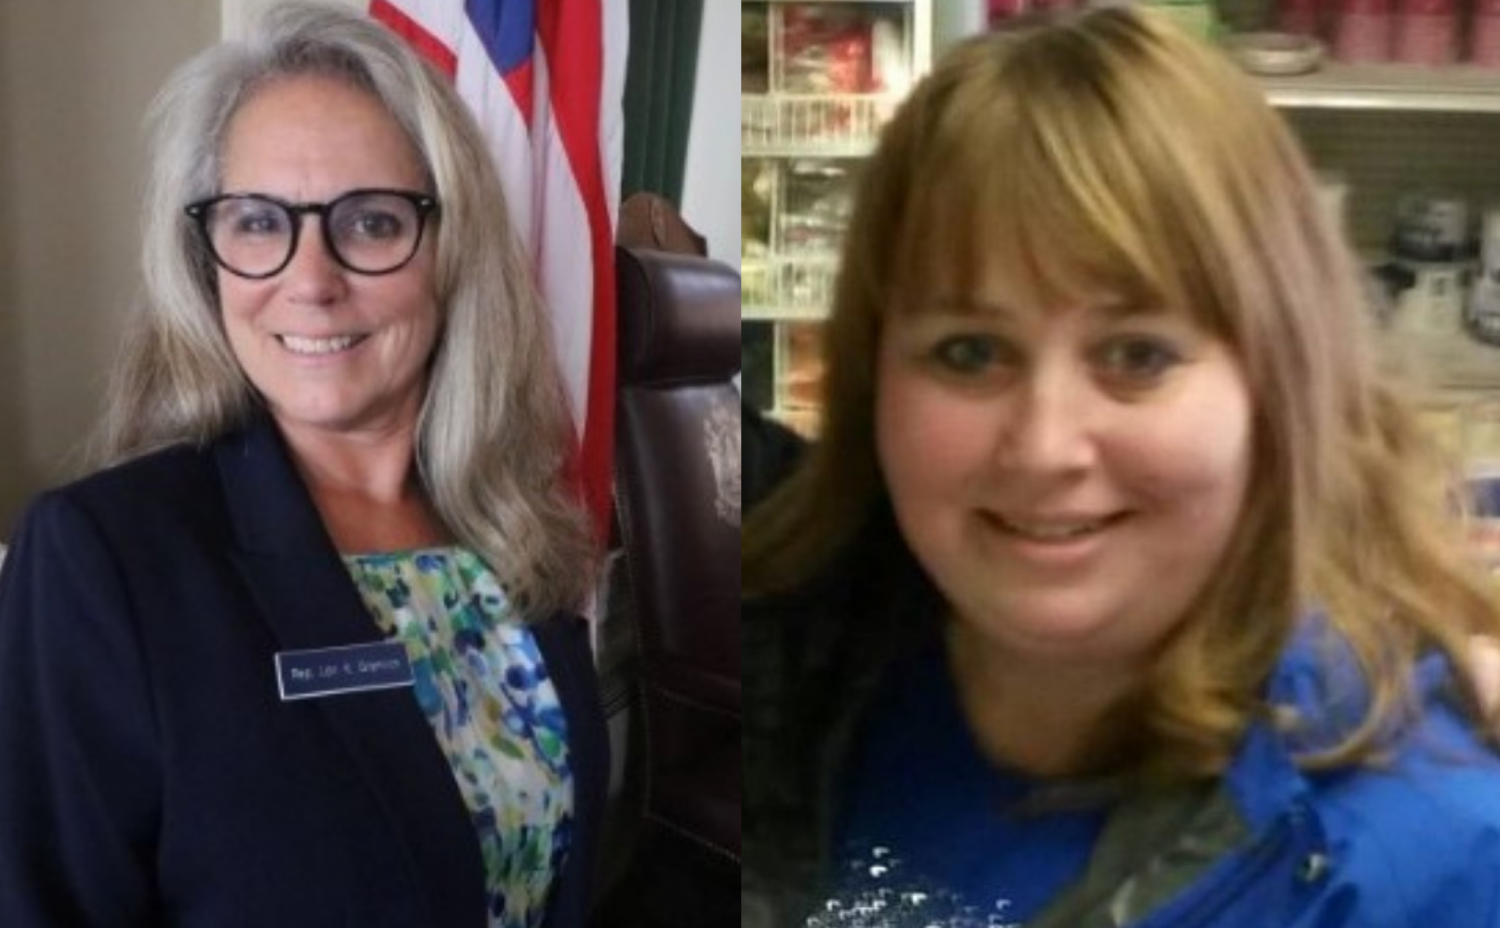 Gramlich, MacDonald compete for State House District 13 seat